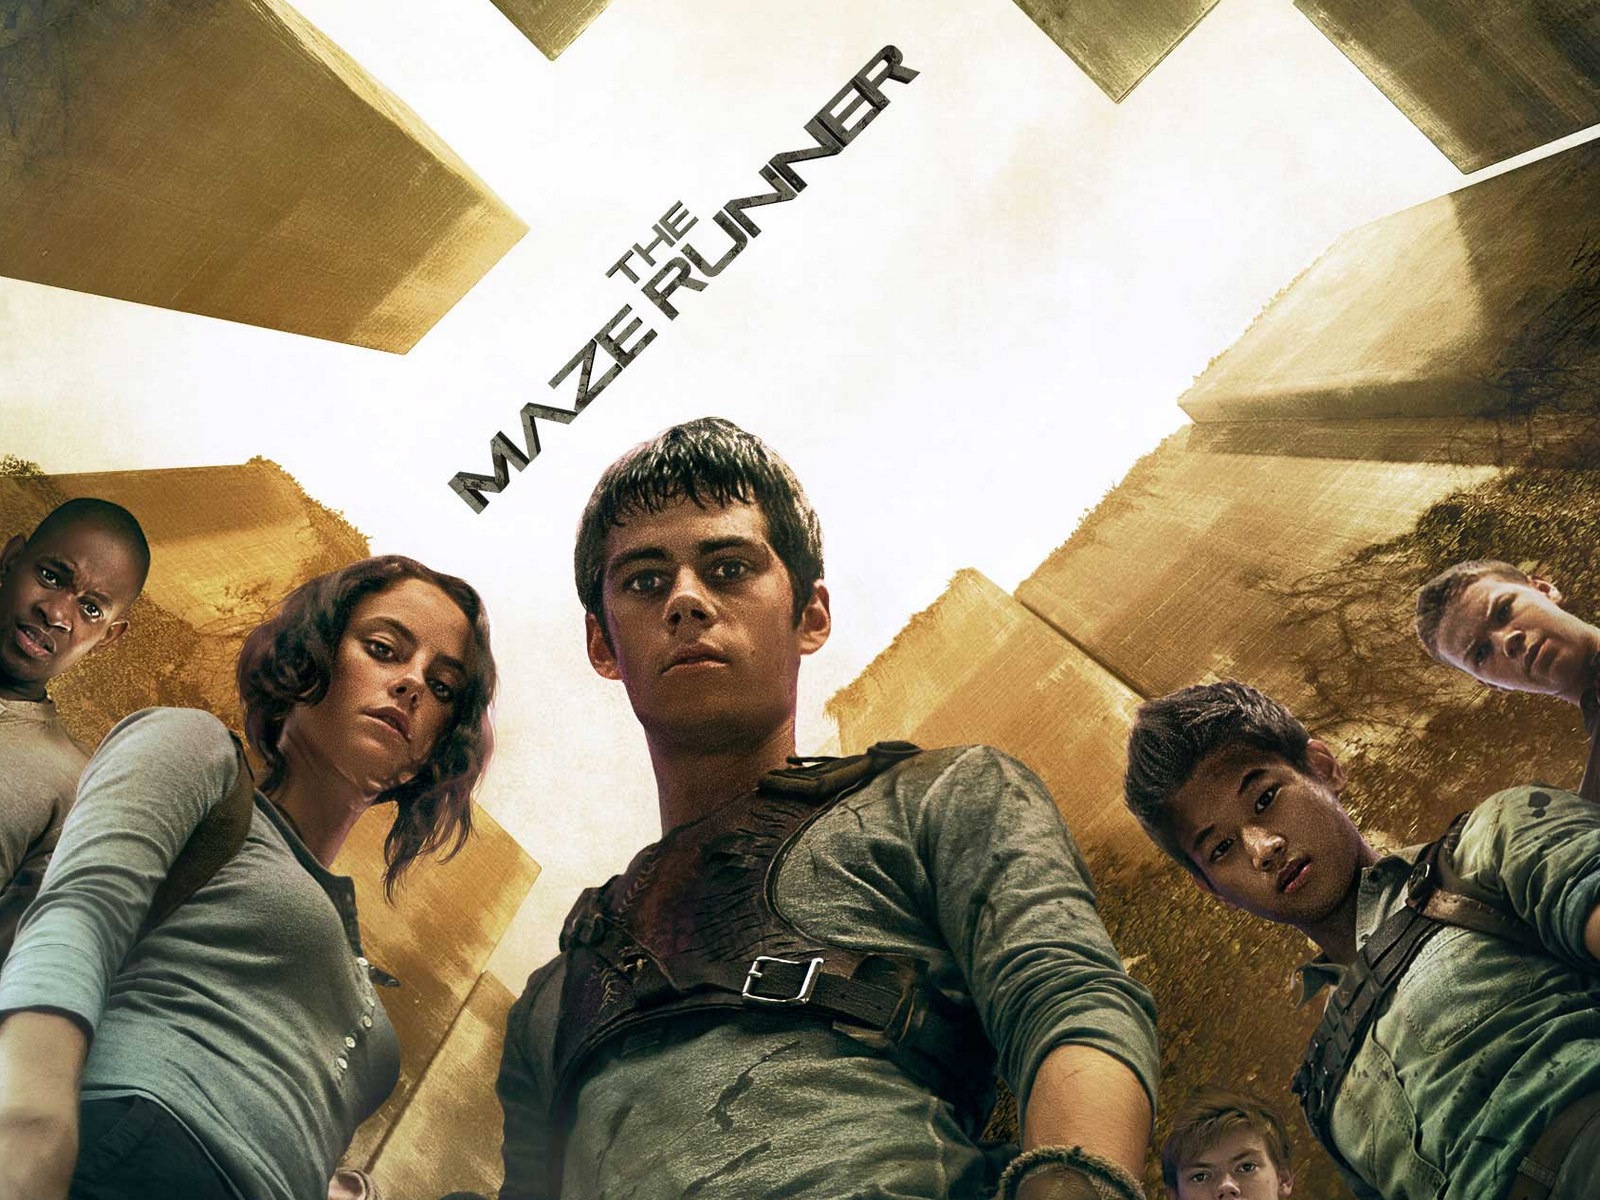 The Maze Runner HD movie wallpapers #4 - 1600x1200